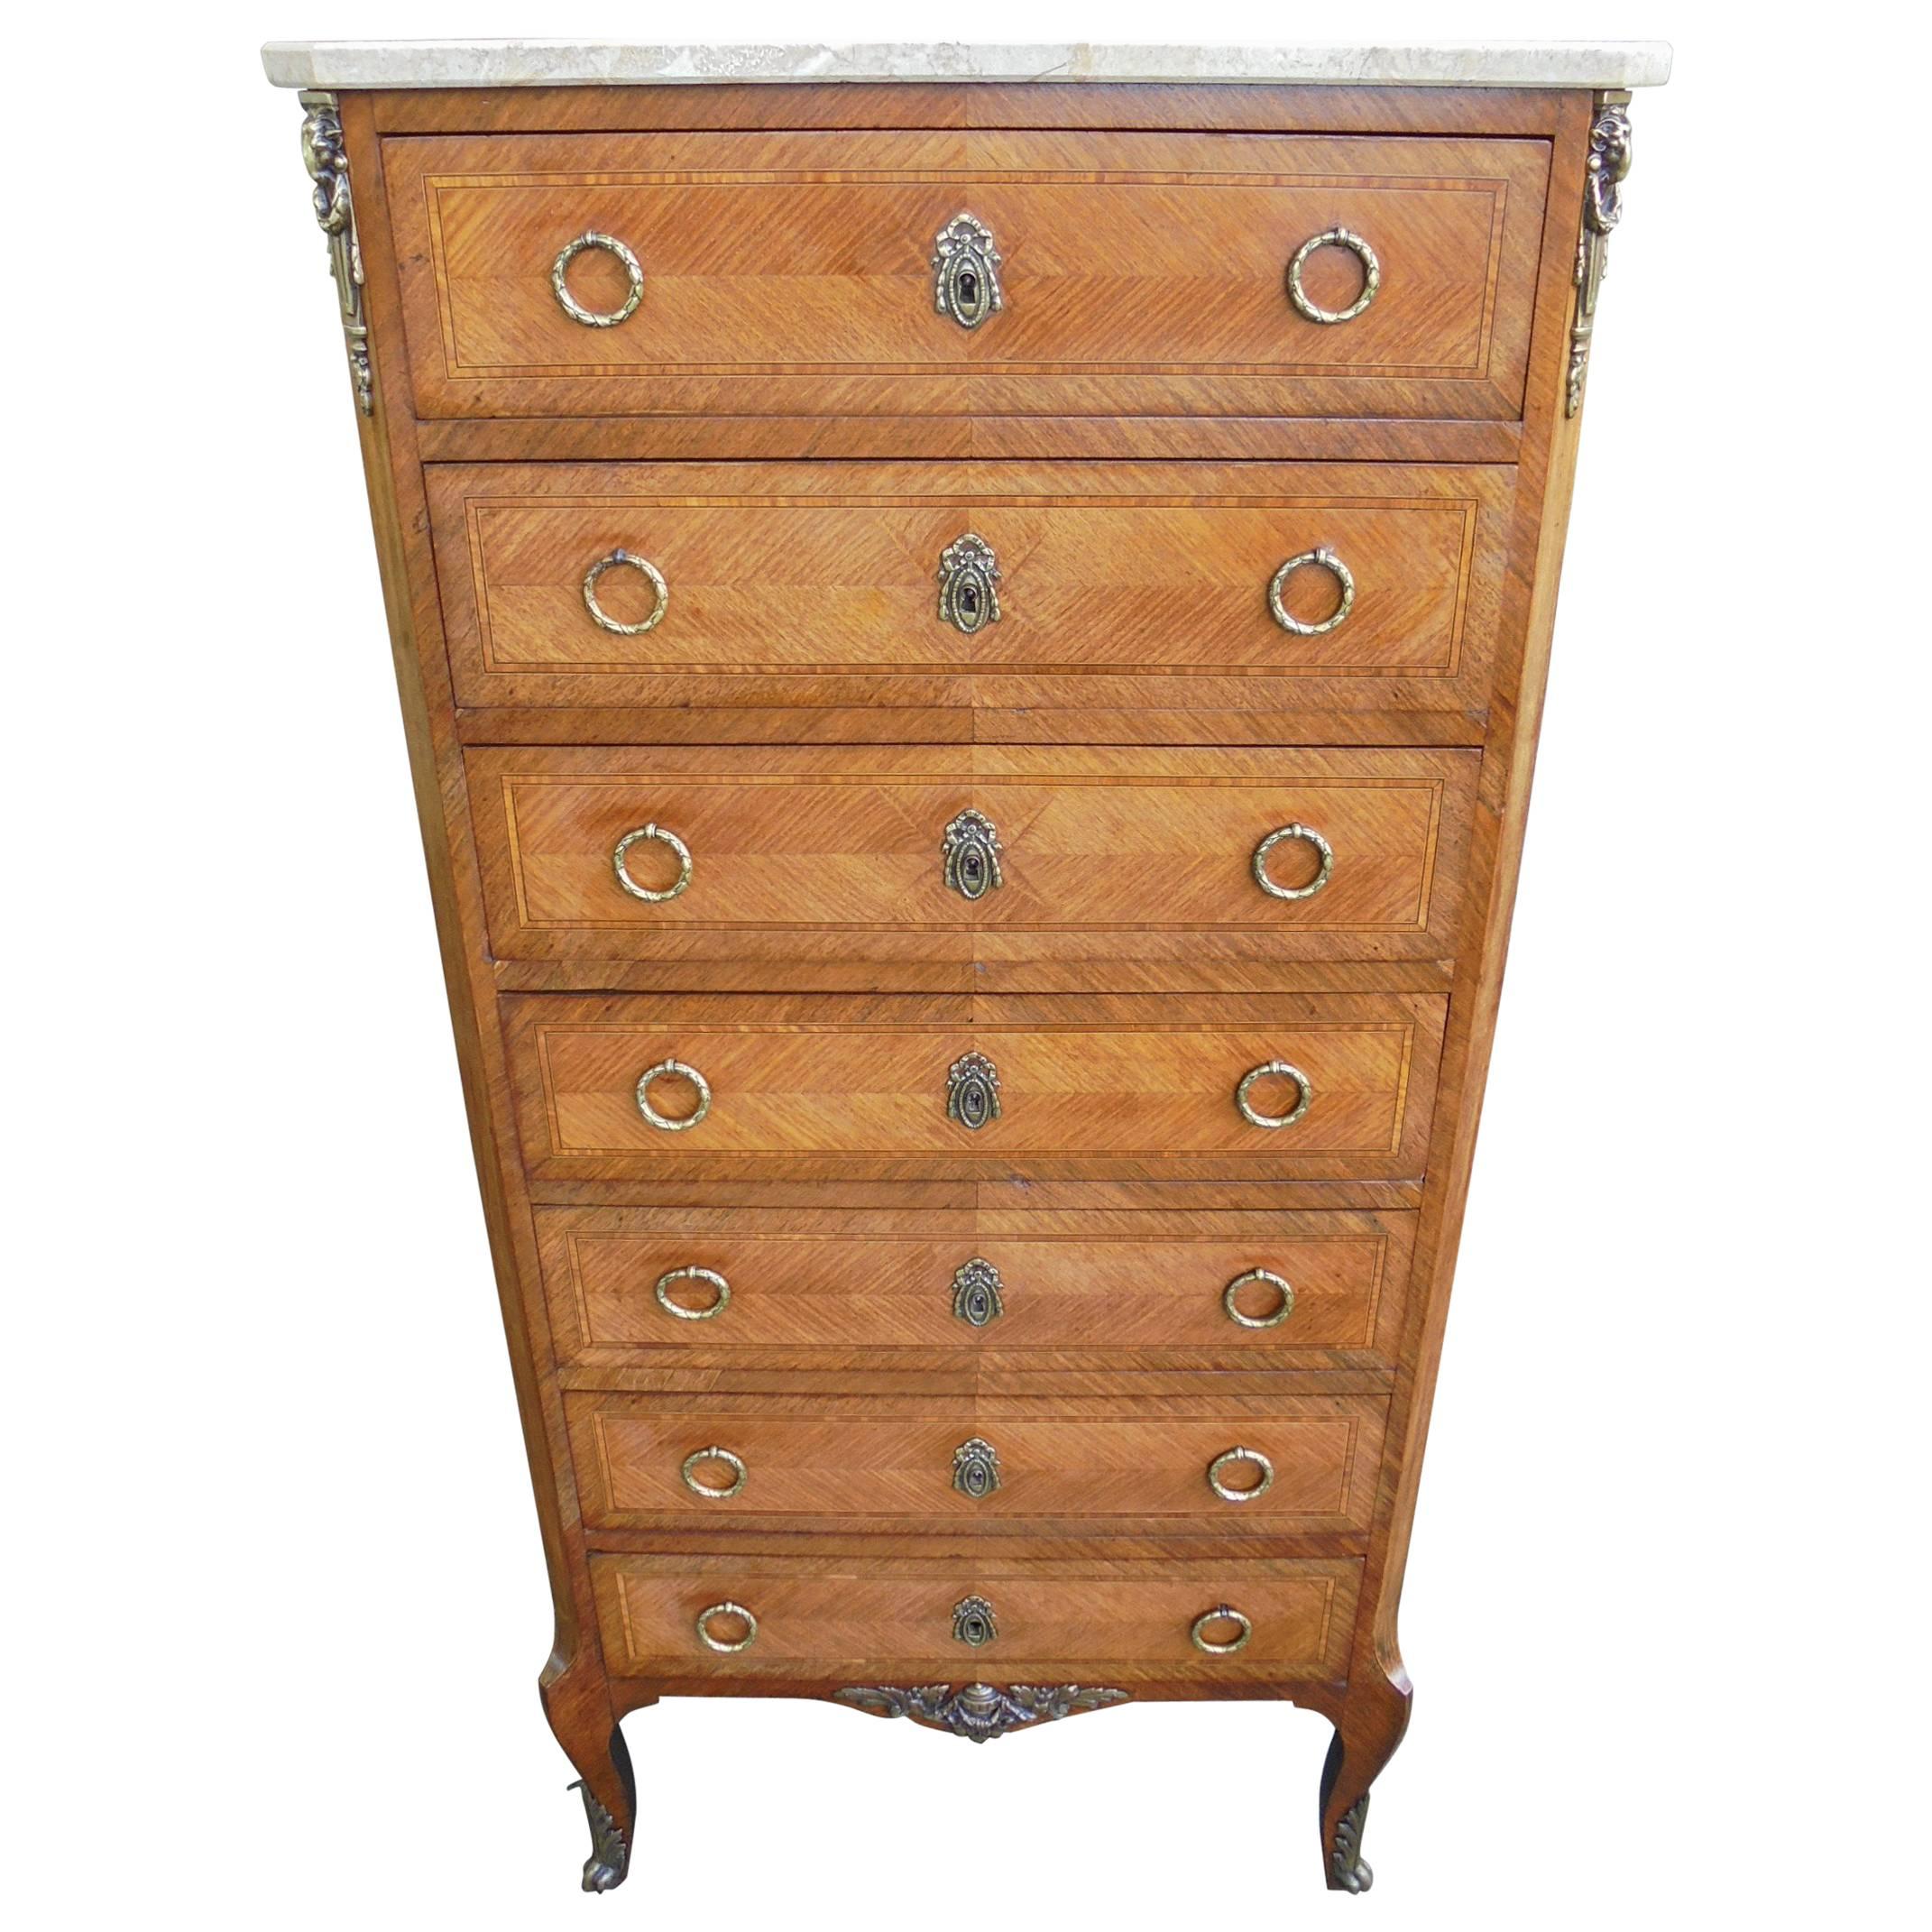 Antique Inlaid Kingwood Marble-Top Chest with Seven Draws For Sale